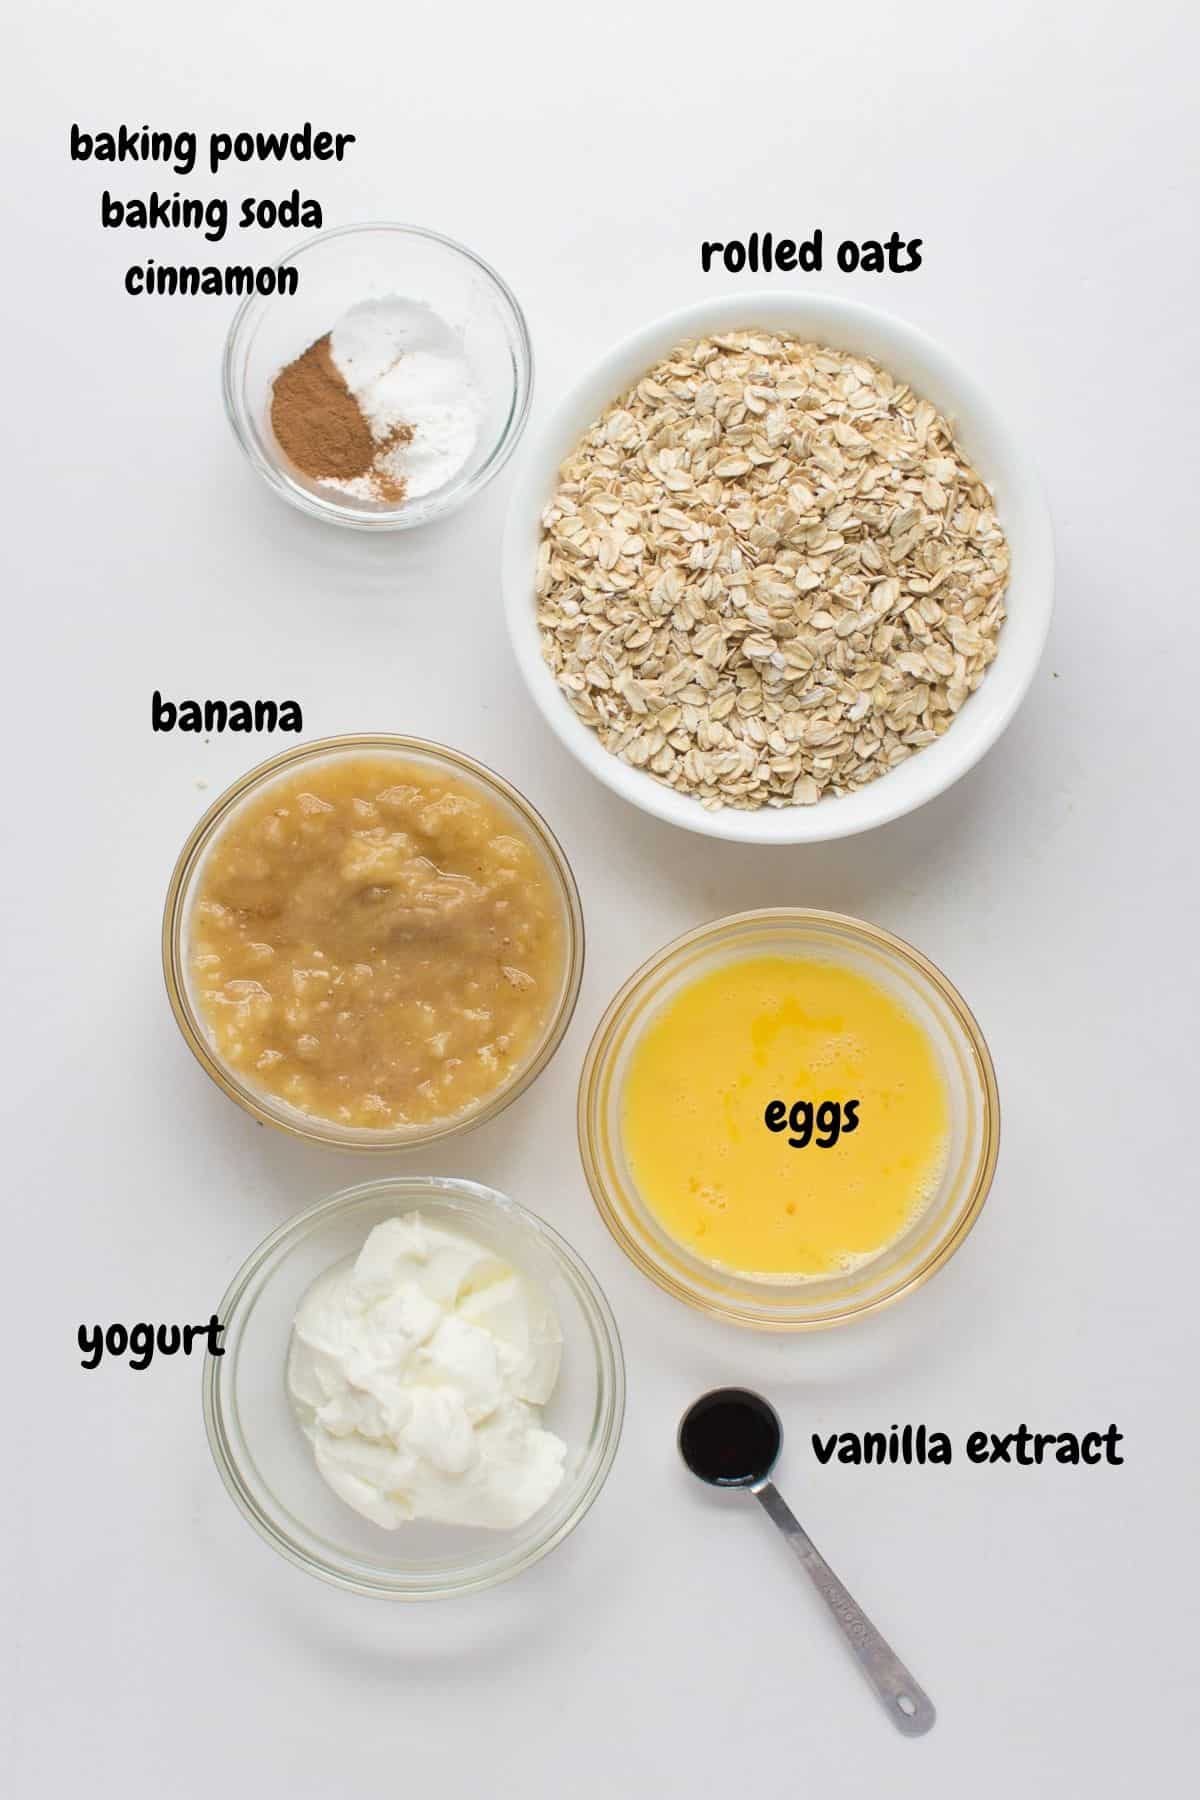 all the ingredient sfor the cake laid out on a white background.